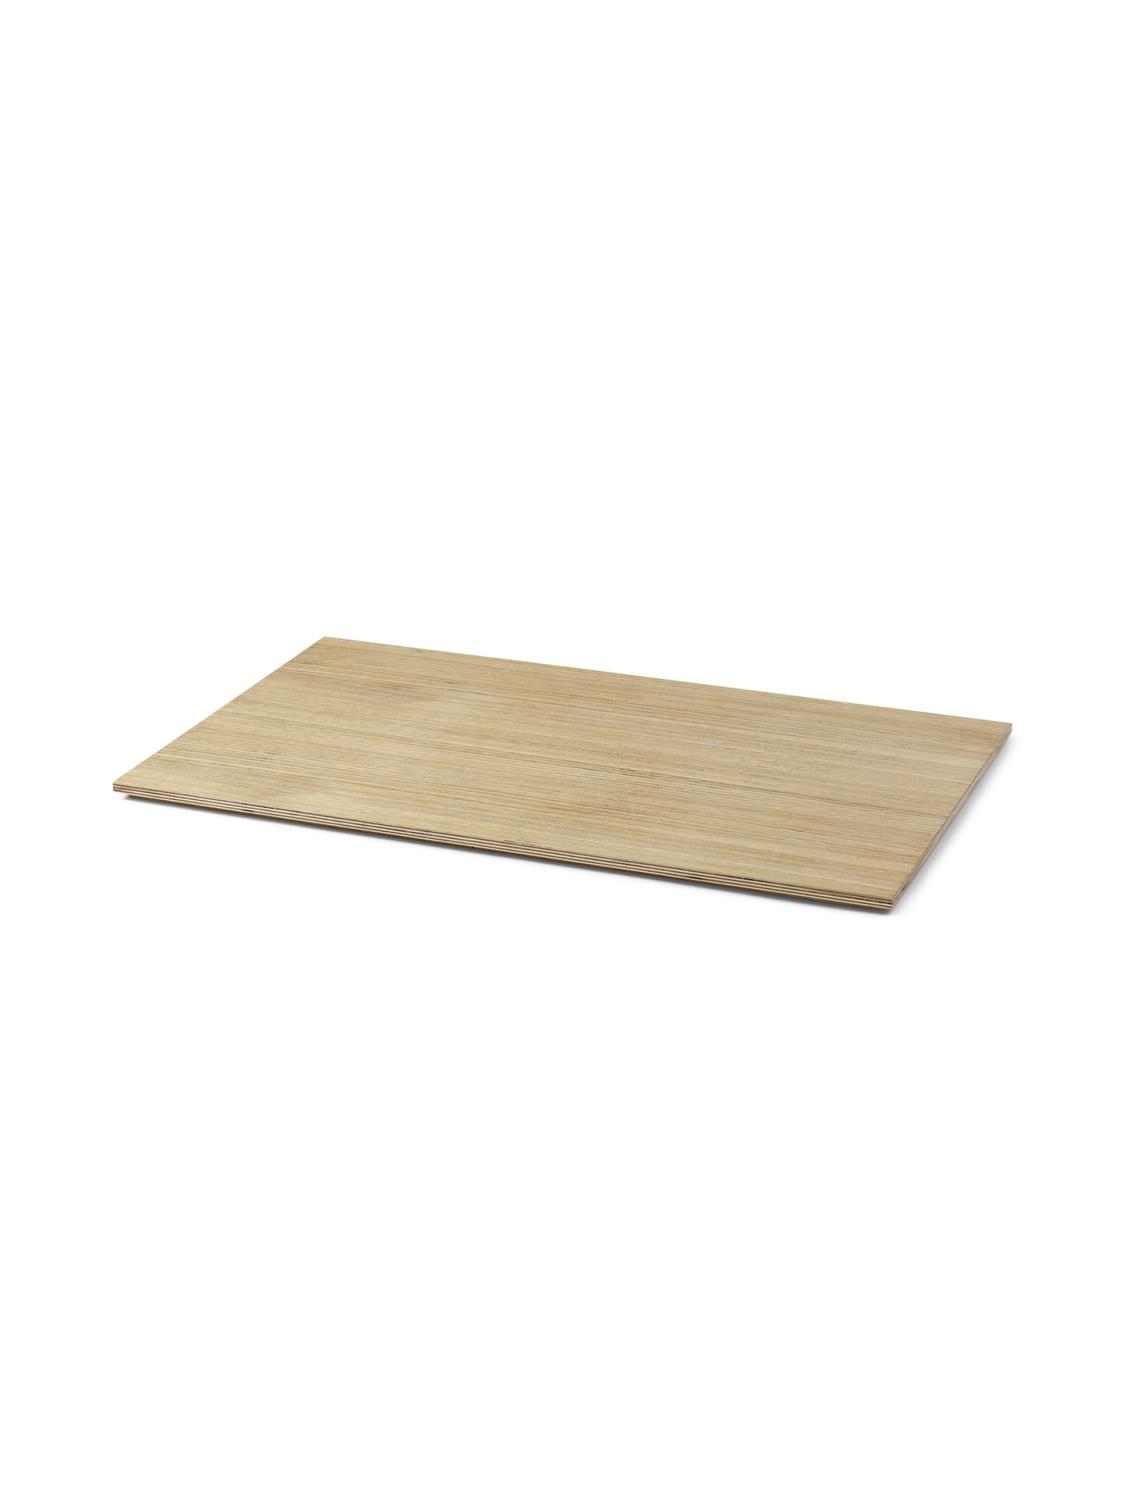 Ferm Living - Tray For Plant Box - Large - Oiled Oak